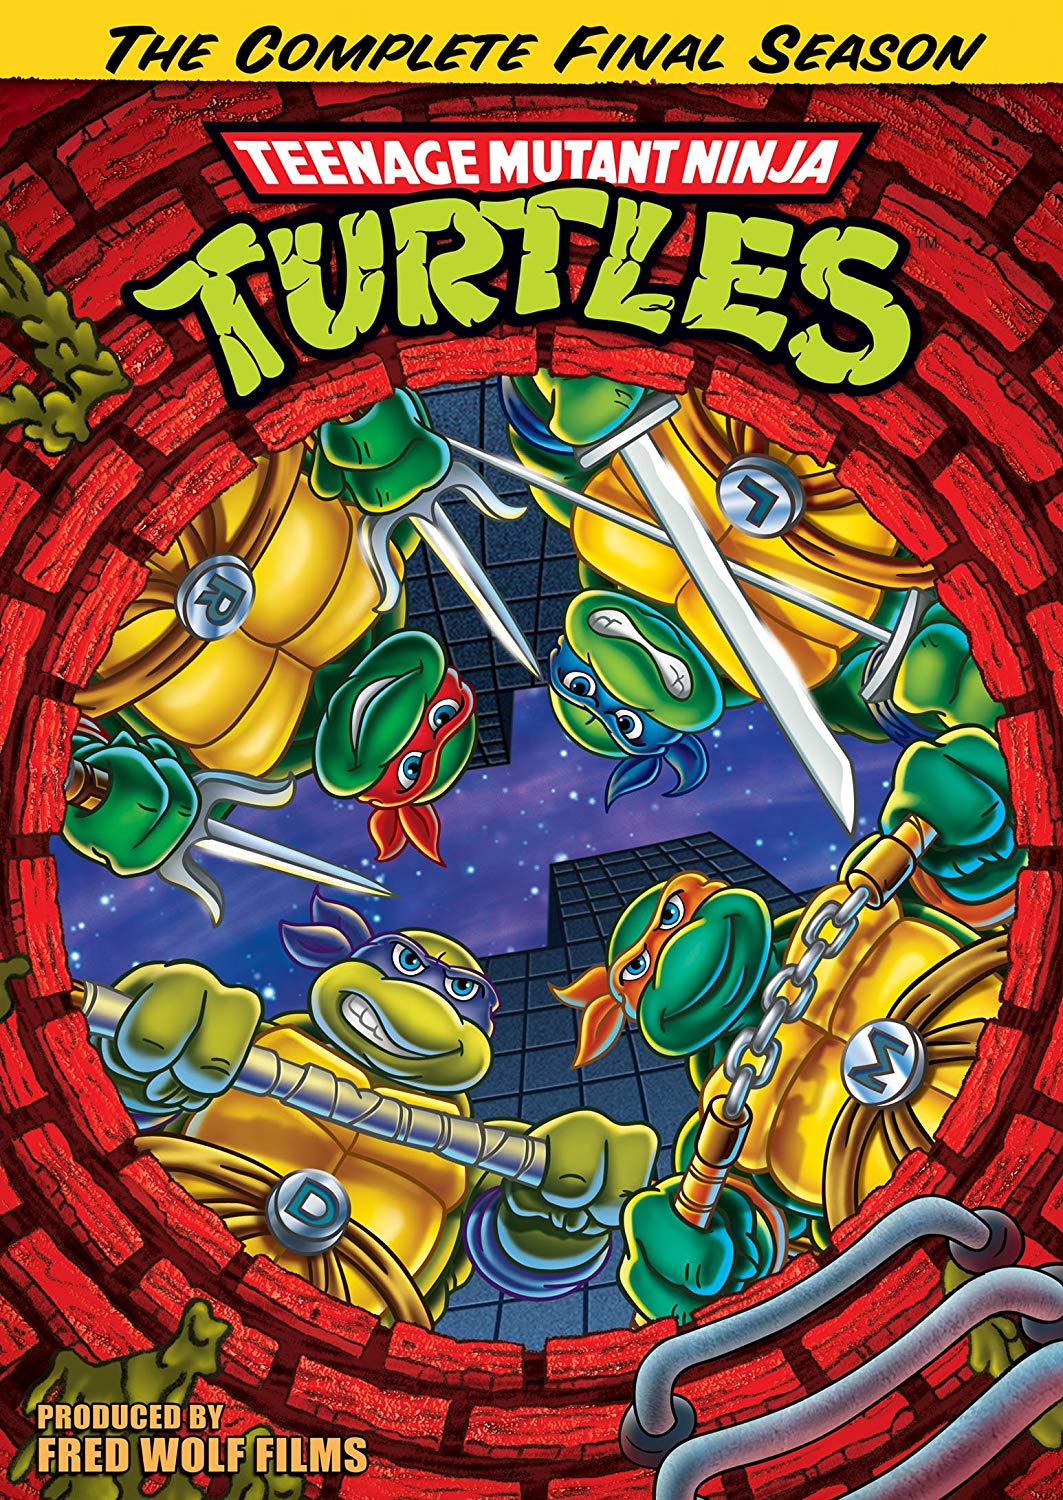 https://static.wikia.nocookie.net/tmnt/images/e/e8/Completefinal.jpg/revision/latest?cb=20181218202125